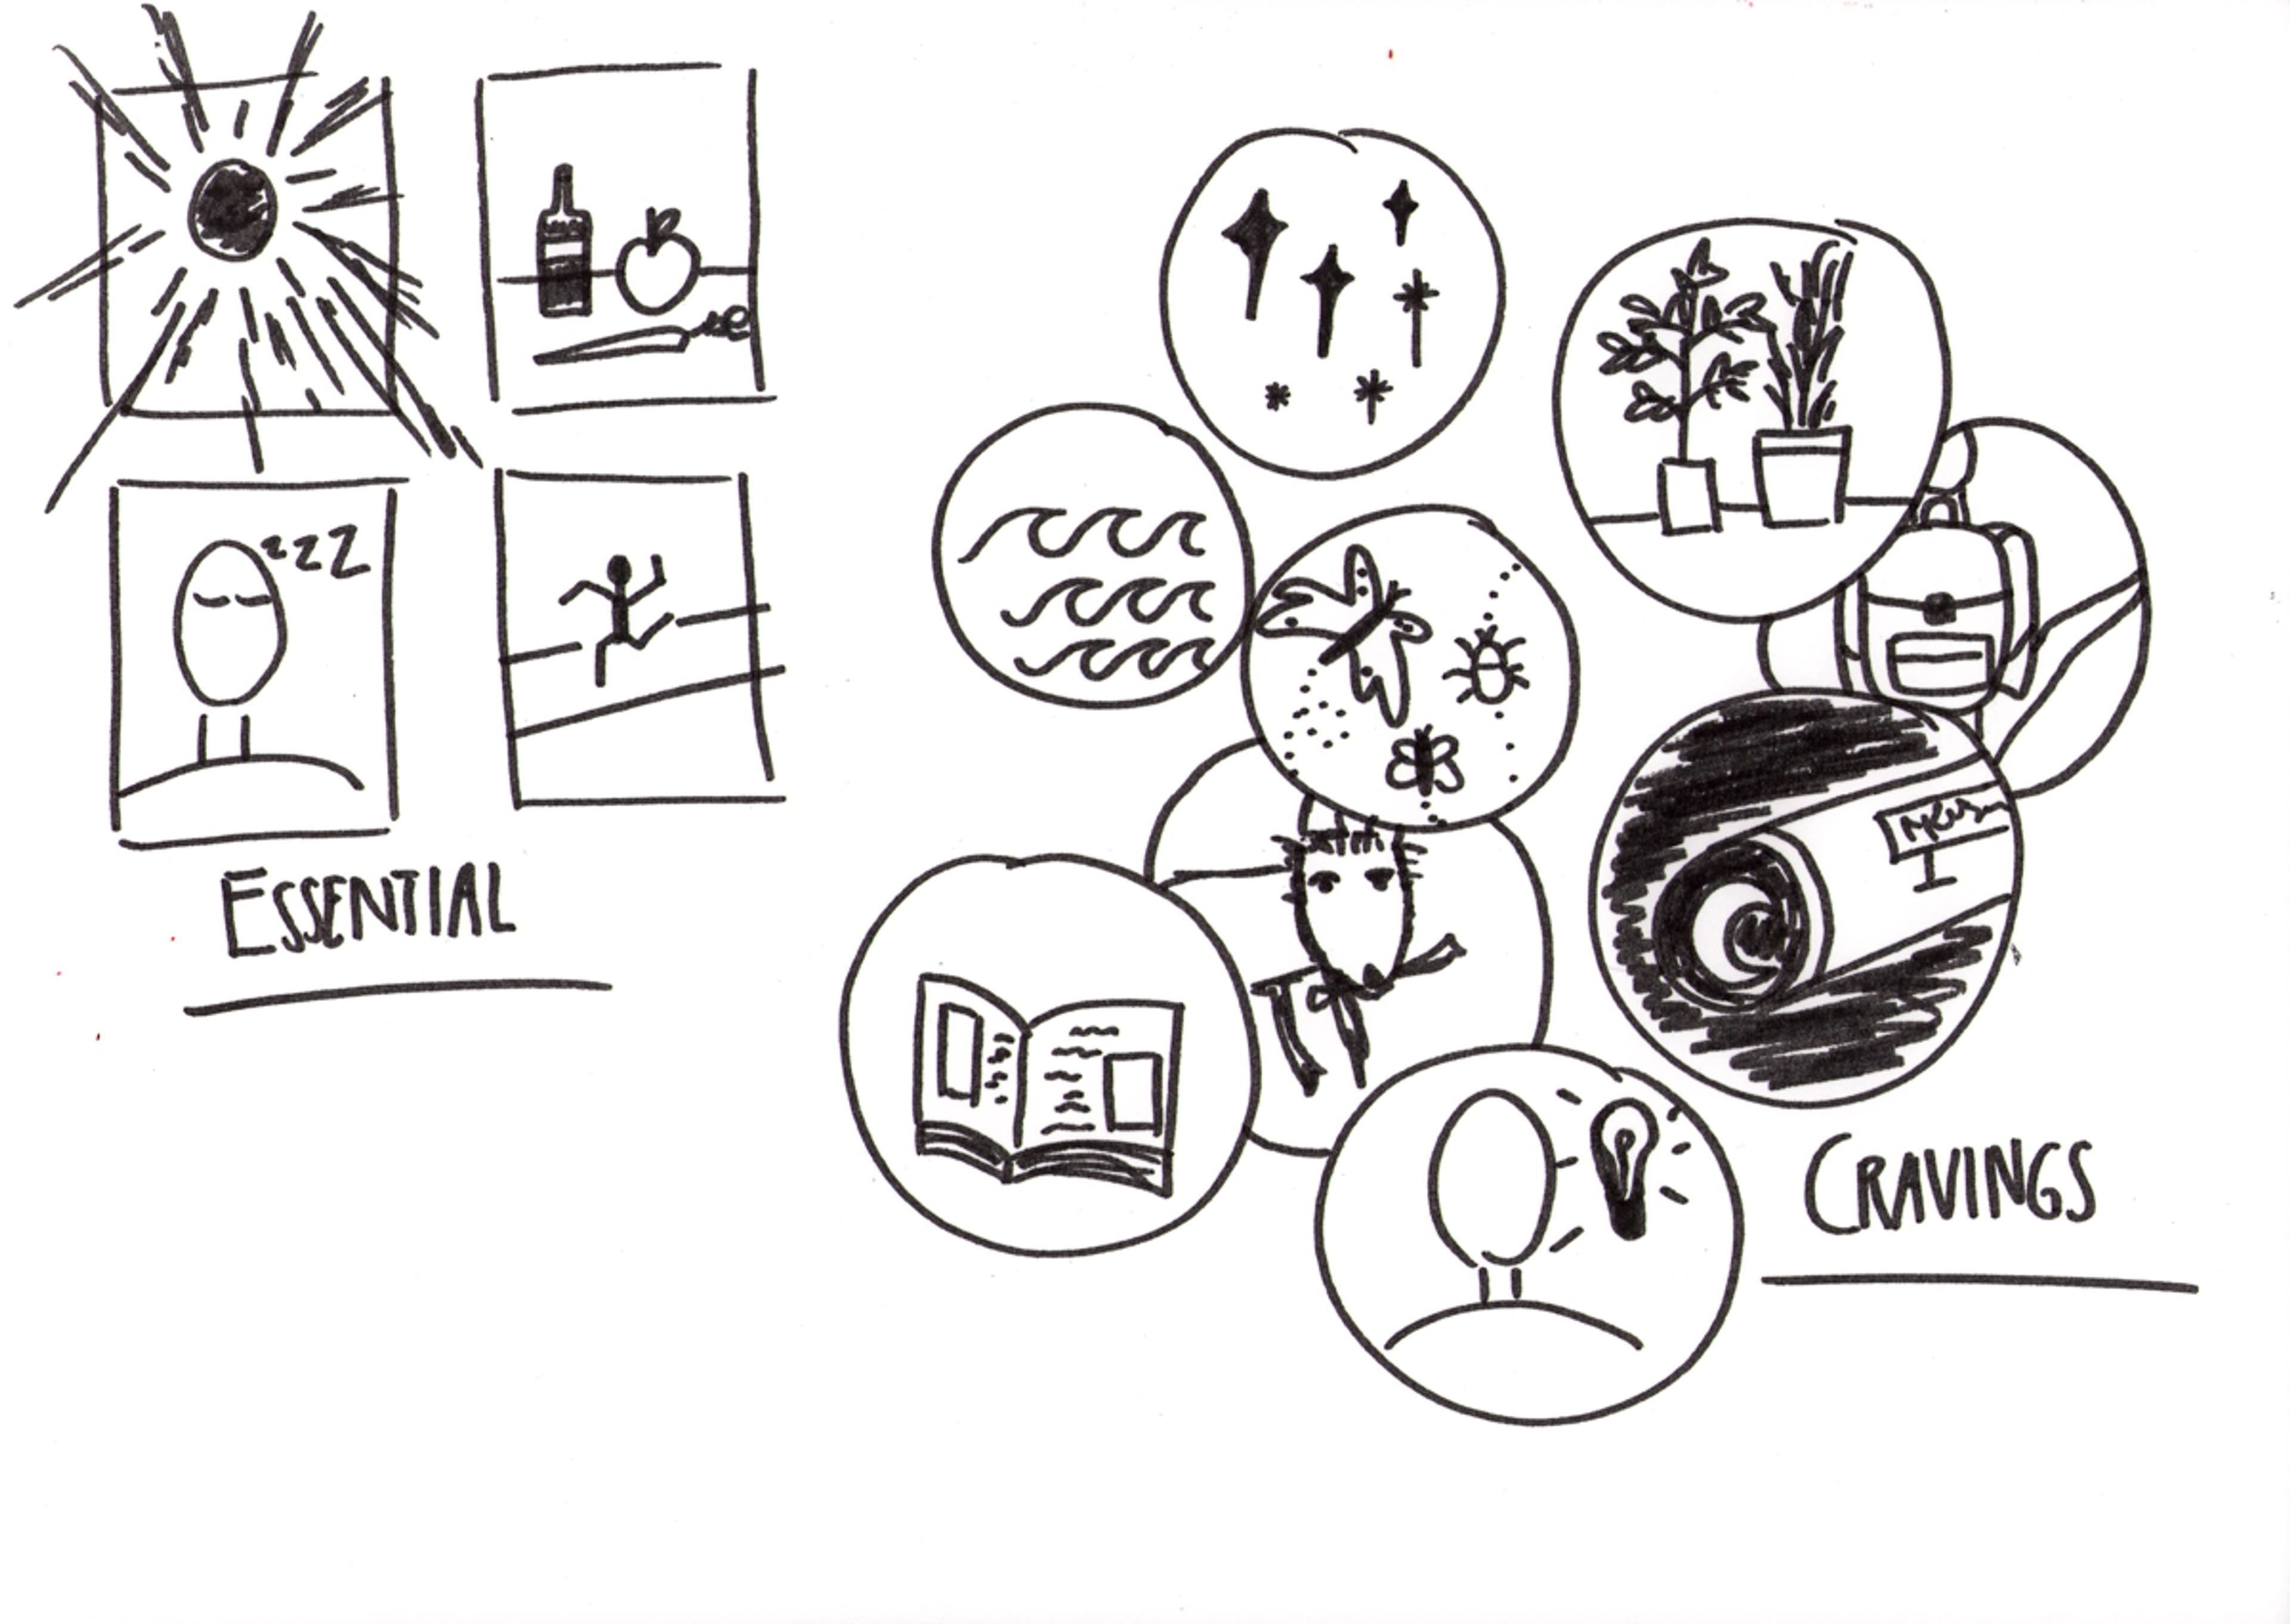 a sketch with black marker of categorizing objects and experiences into essentials or cravings